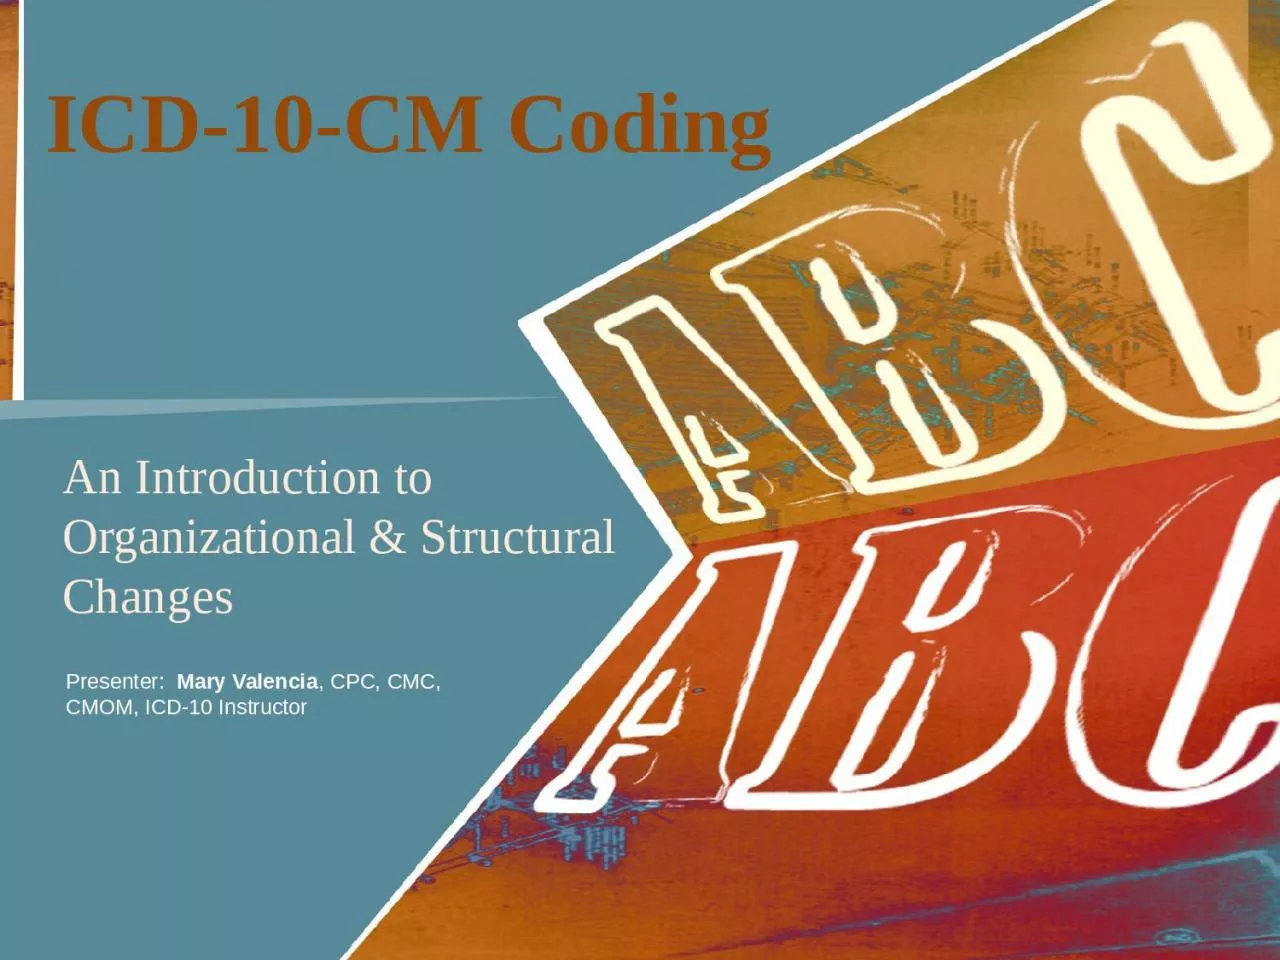 ICD-10-CM Coding An Introduction to Organizational & Structural Changes